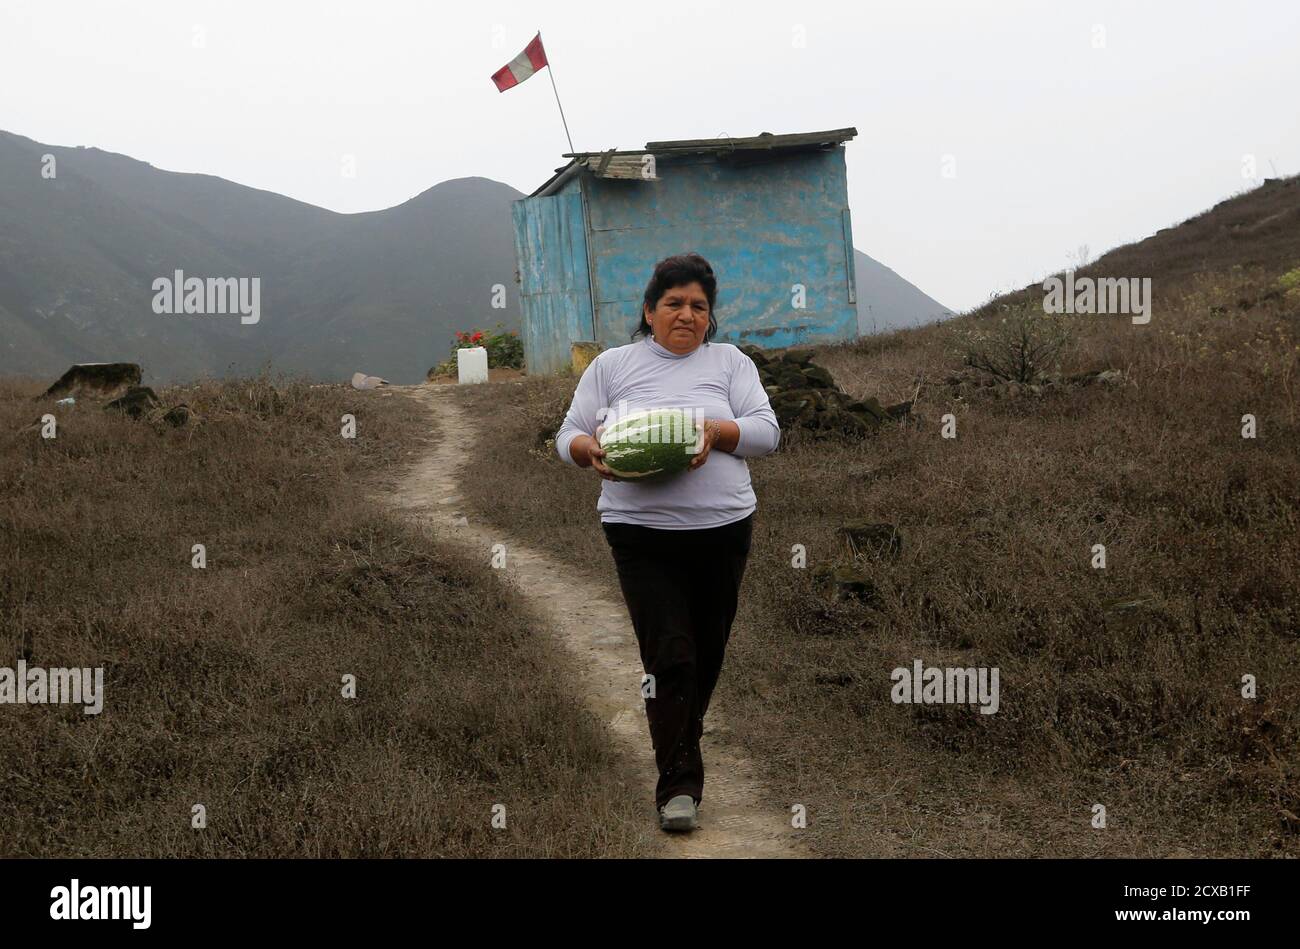 Maria Poma carries a harvested pumpkin that was grown with water collected by nets that trap moisture from fog, on the hillside of Villa Maria Del Triunfo in Lima, November 20, 2014. The net-like structures that trap moisture from fog and mist were an initiative by a group of community leaders called "Peruvians Without Water", who said that the nets in total collect around 150 cubic meters of water per month during the winter season. They built a total of about 100 nets, and the water collected is distributed to the community for agricultural purposes.  REUTERS/Mariana Bazo  (PERU - Tags: SOCI Stock Photo